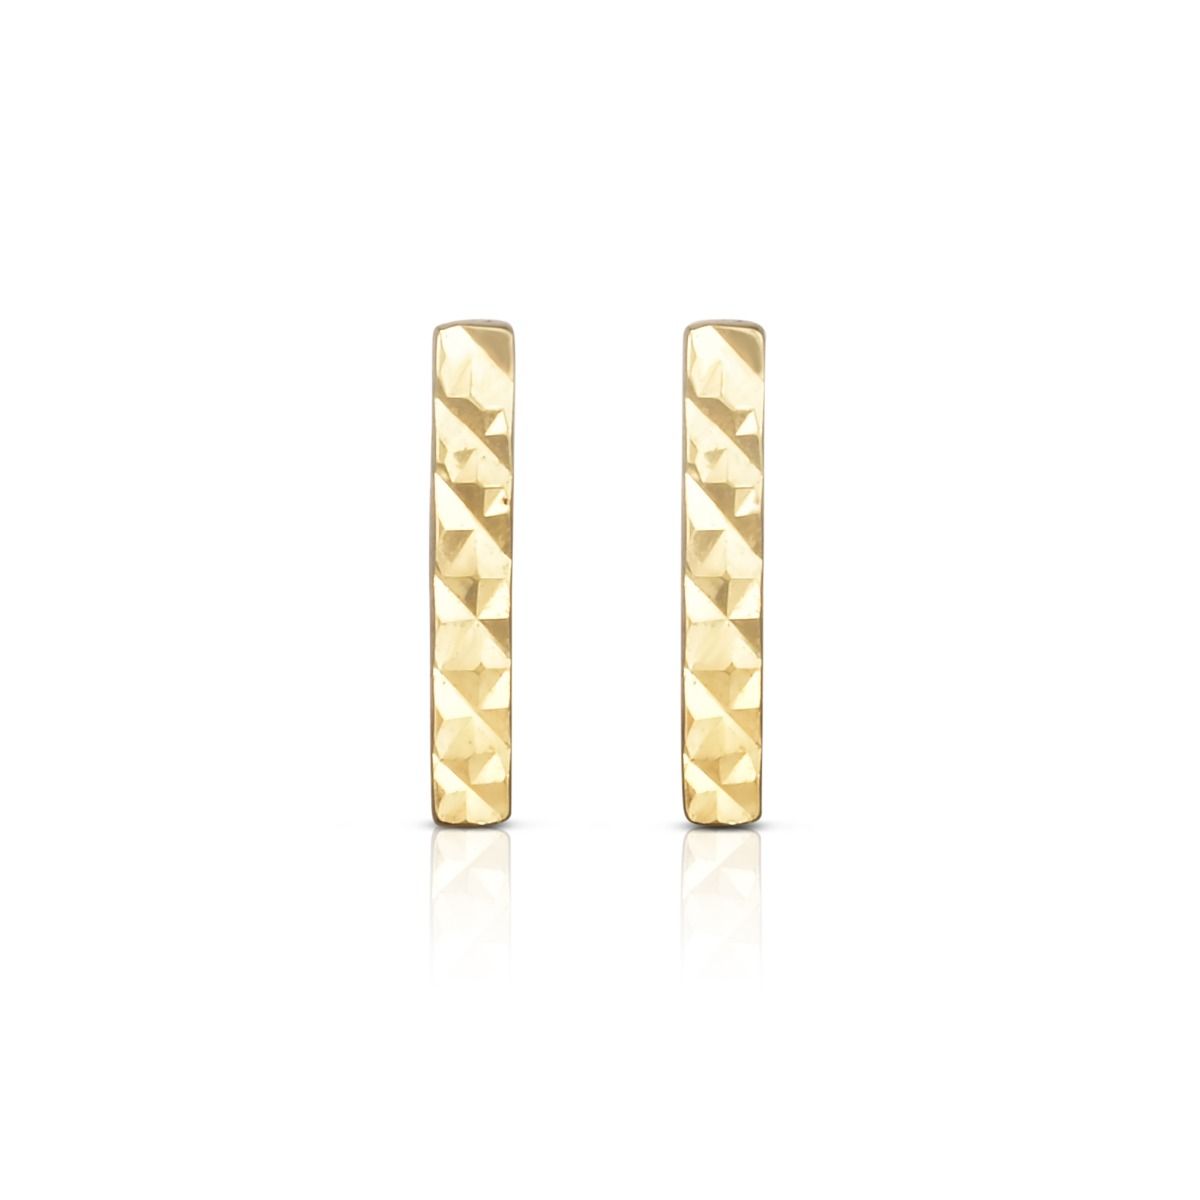 Minimalist Solid Gold Diamond Cut Vertical Bar Earrings with Push Back Clasp - wingroupjewelry